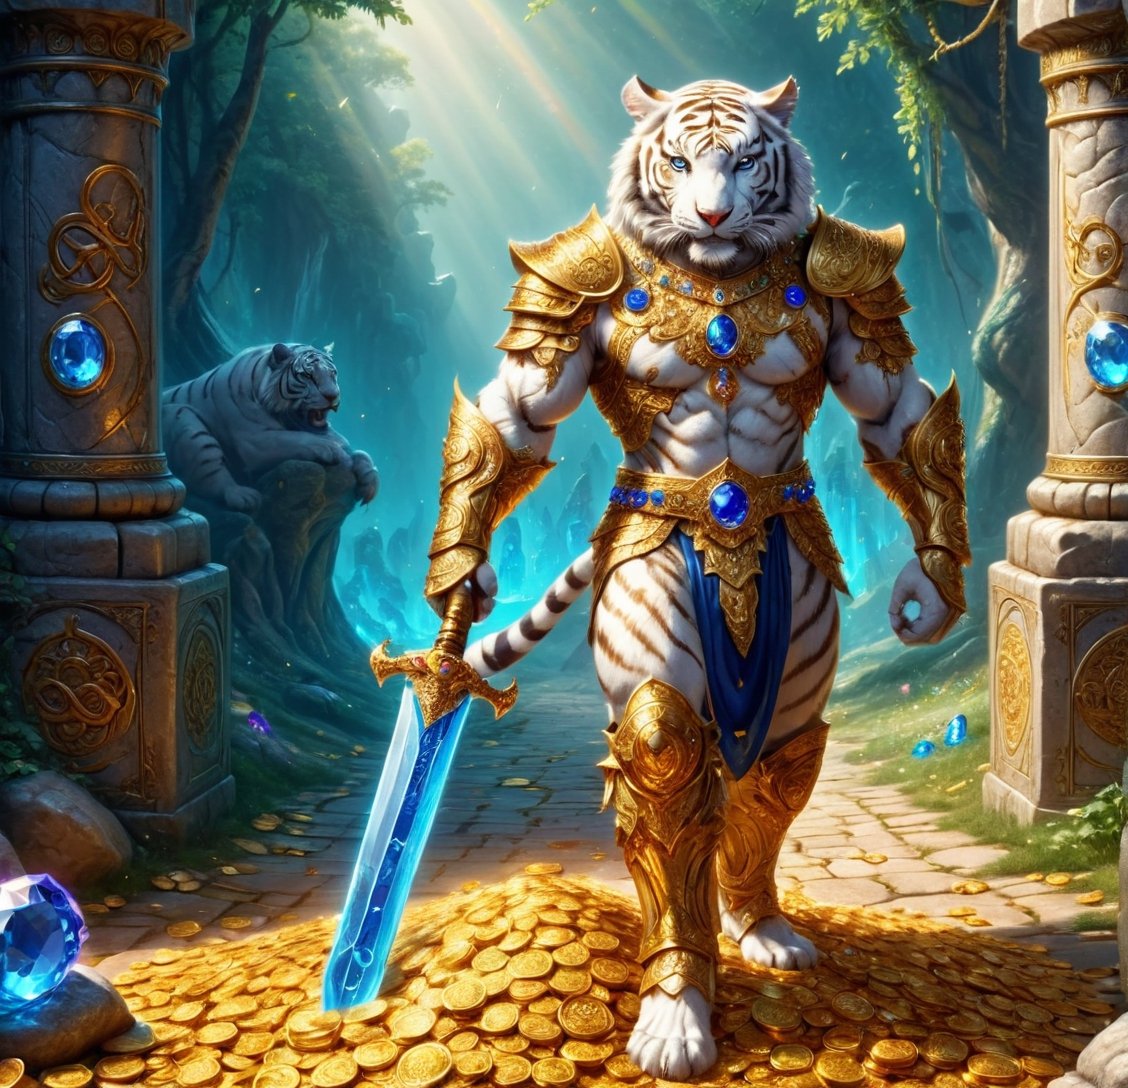 
It is daytime and we see the full length image of a tall muscular white human tiger warrior with armor and blue sword standing on gold coins and on jewels, emeralds, rubies, sapphires, diamonds, in front of him a golden path full of treasure chests and jewelry, there is gold everywhere and solid gold letters H, letter H